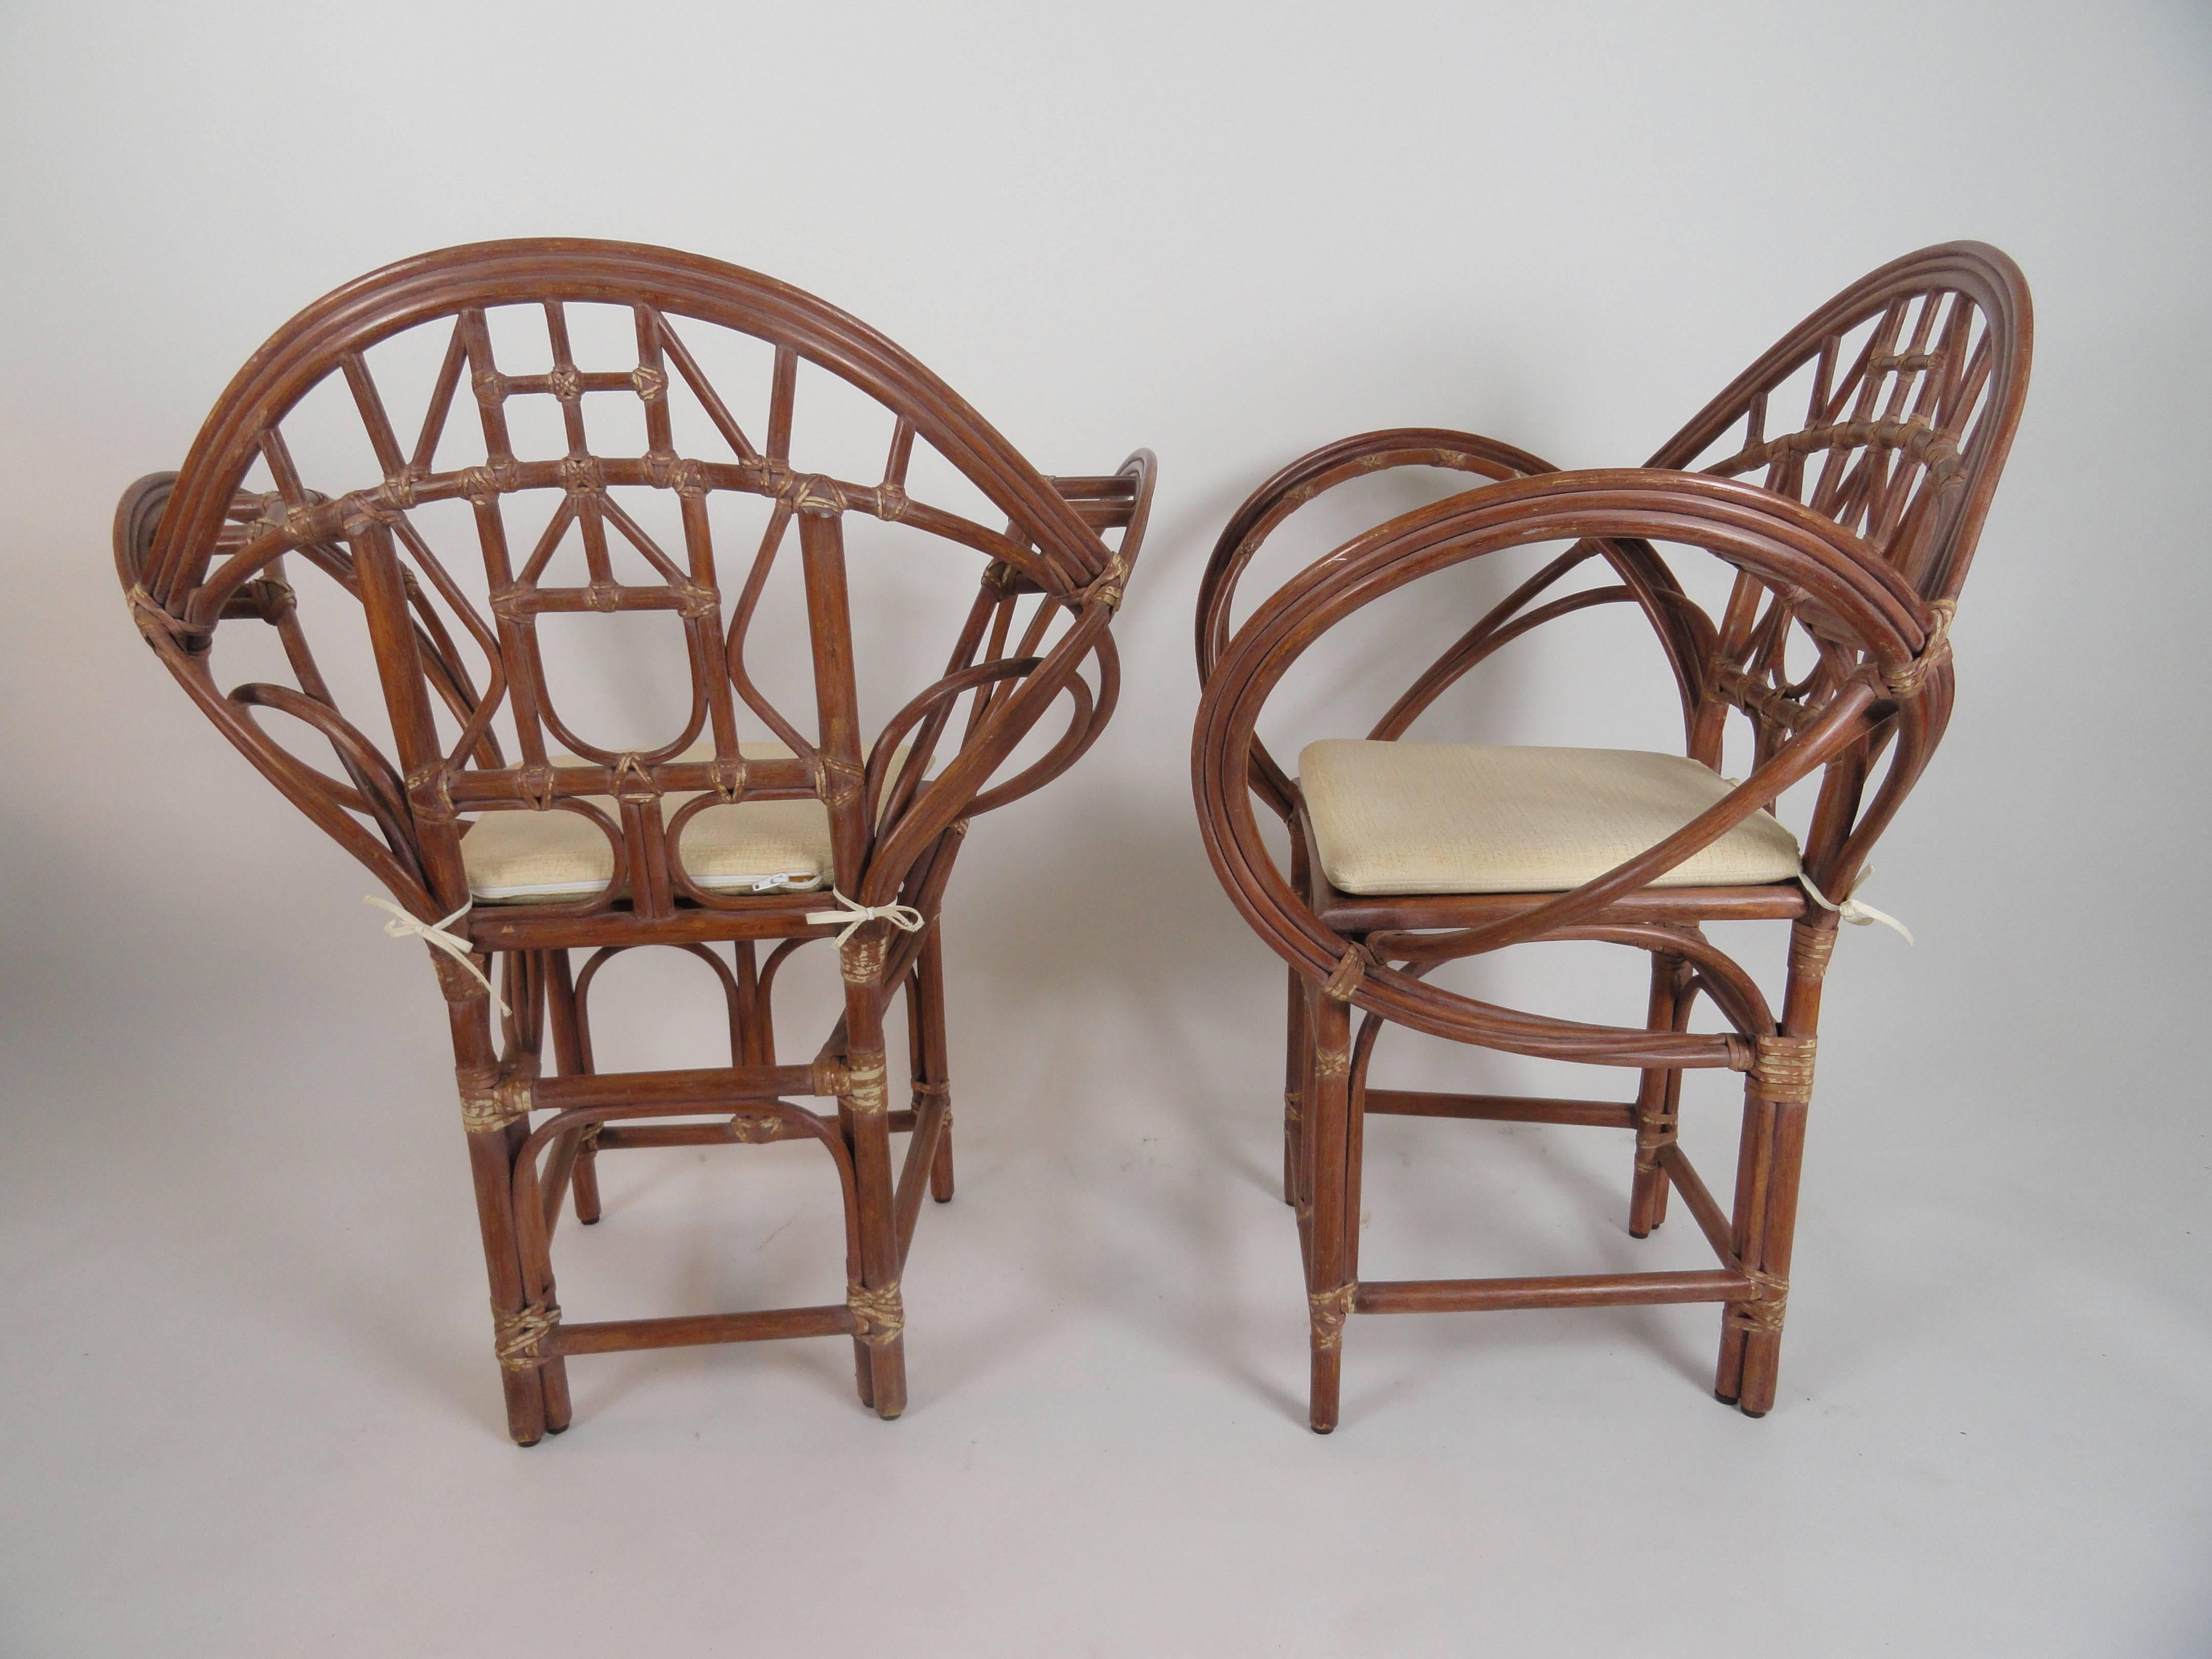 Pair of McGuire Butterfly chairs (M-31).
Designed by Edward Tuttle, McGuire's famous Butterfly chair is a study in fluidity. This graceful design features sweeping arms of delicate rattan. The arching back displays a symmetric series of both curved